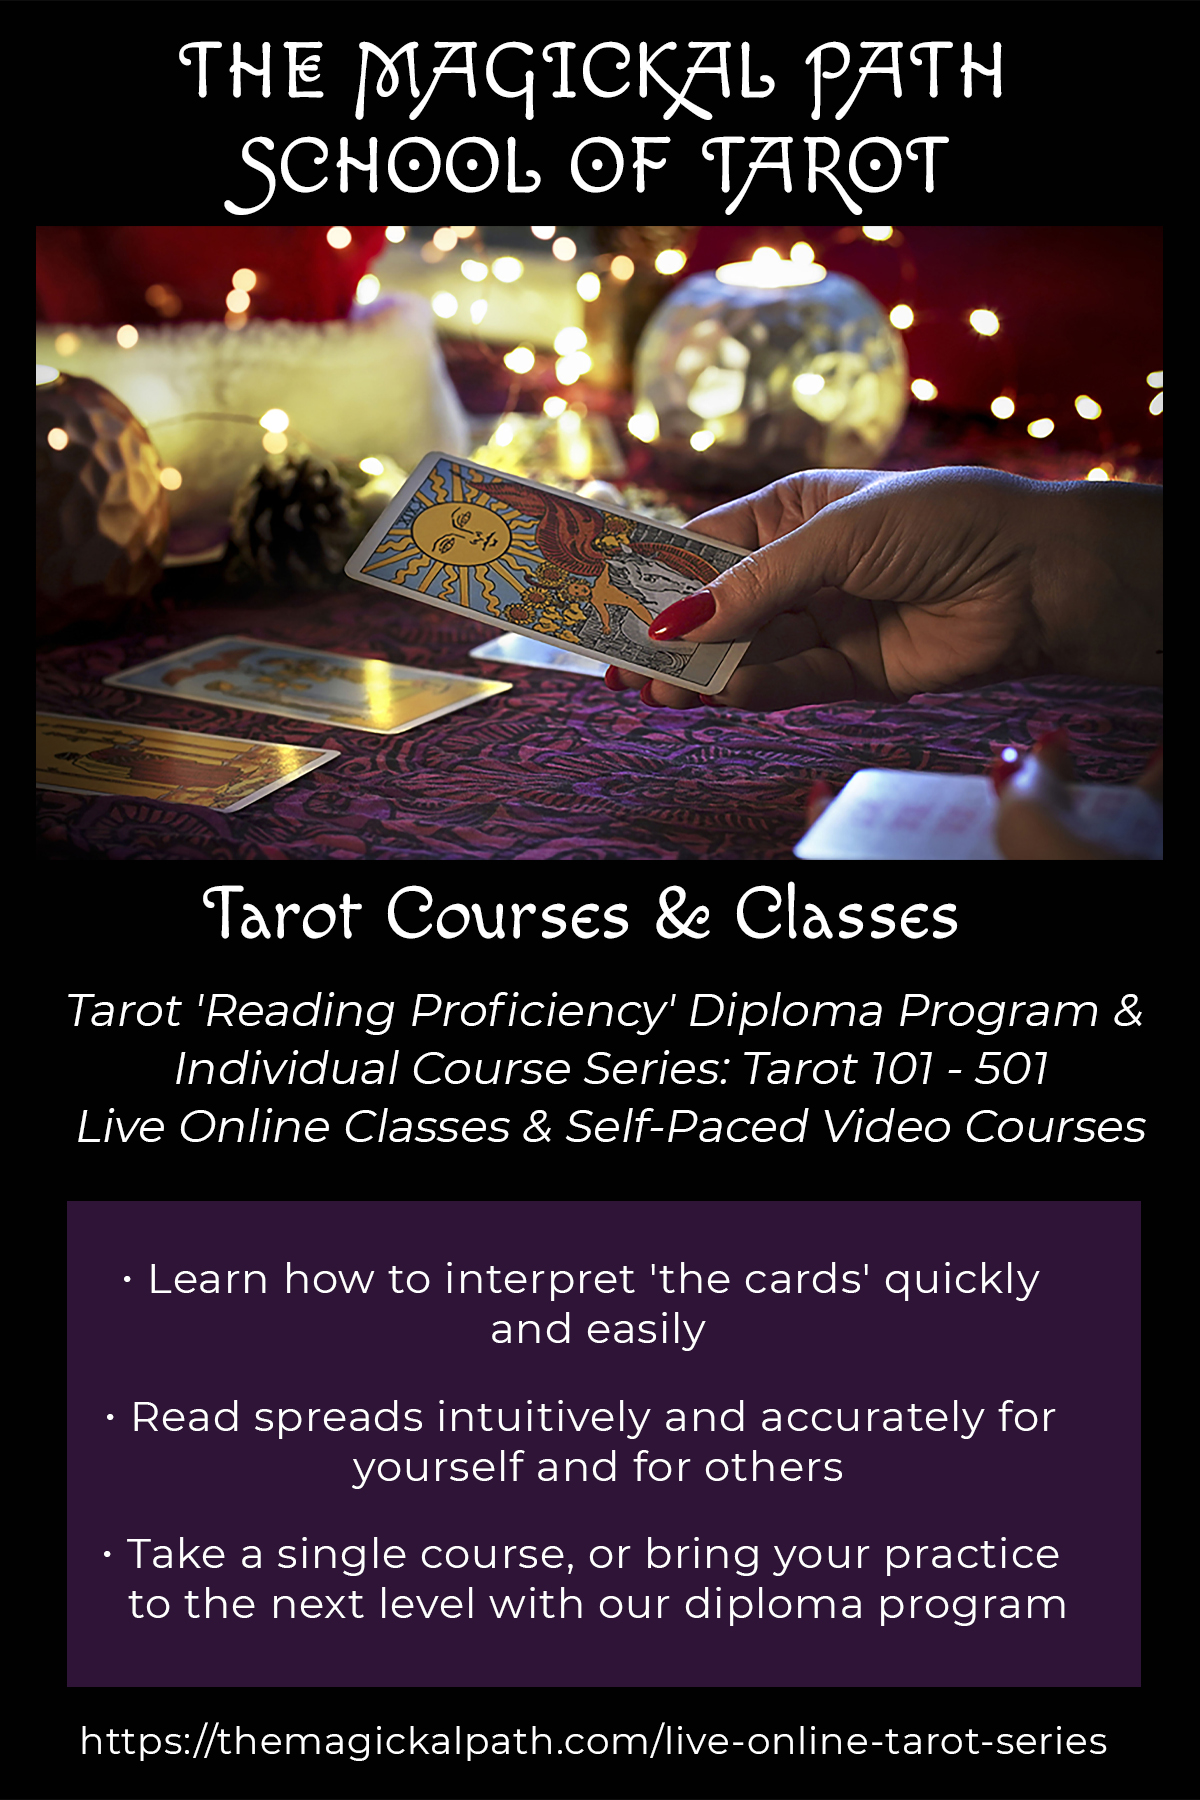 Photo of tarot cards and hand pulling a card; it is the main image for The Magickal Path School of Tarot course series and diploma program